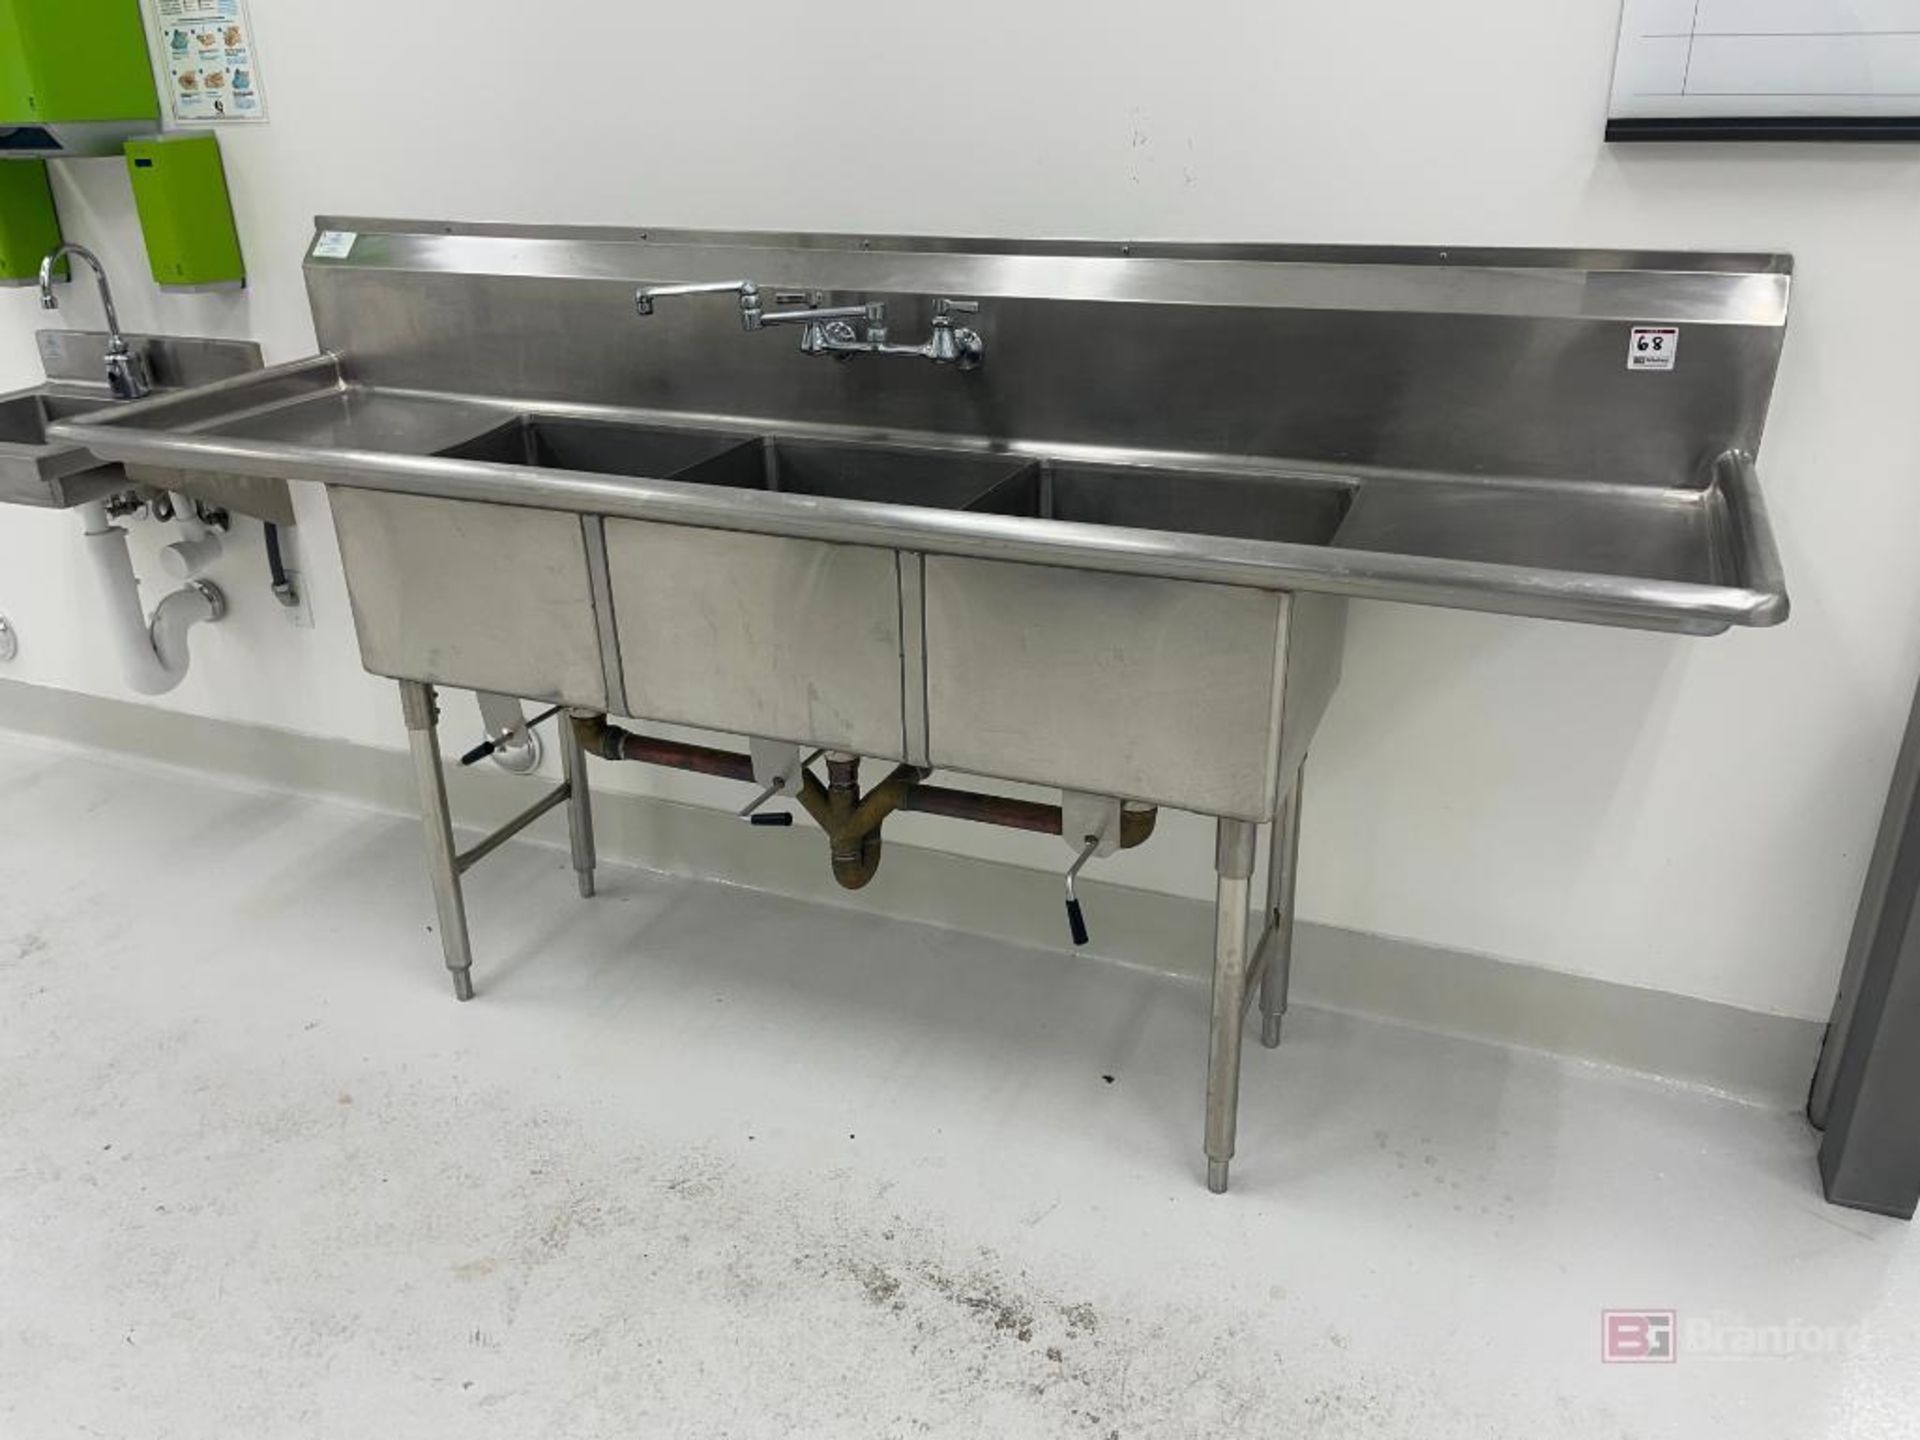 3-Bay Stainless Steel Sink